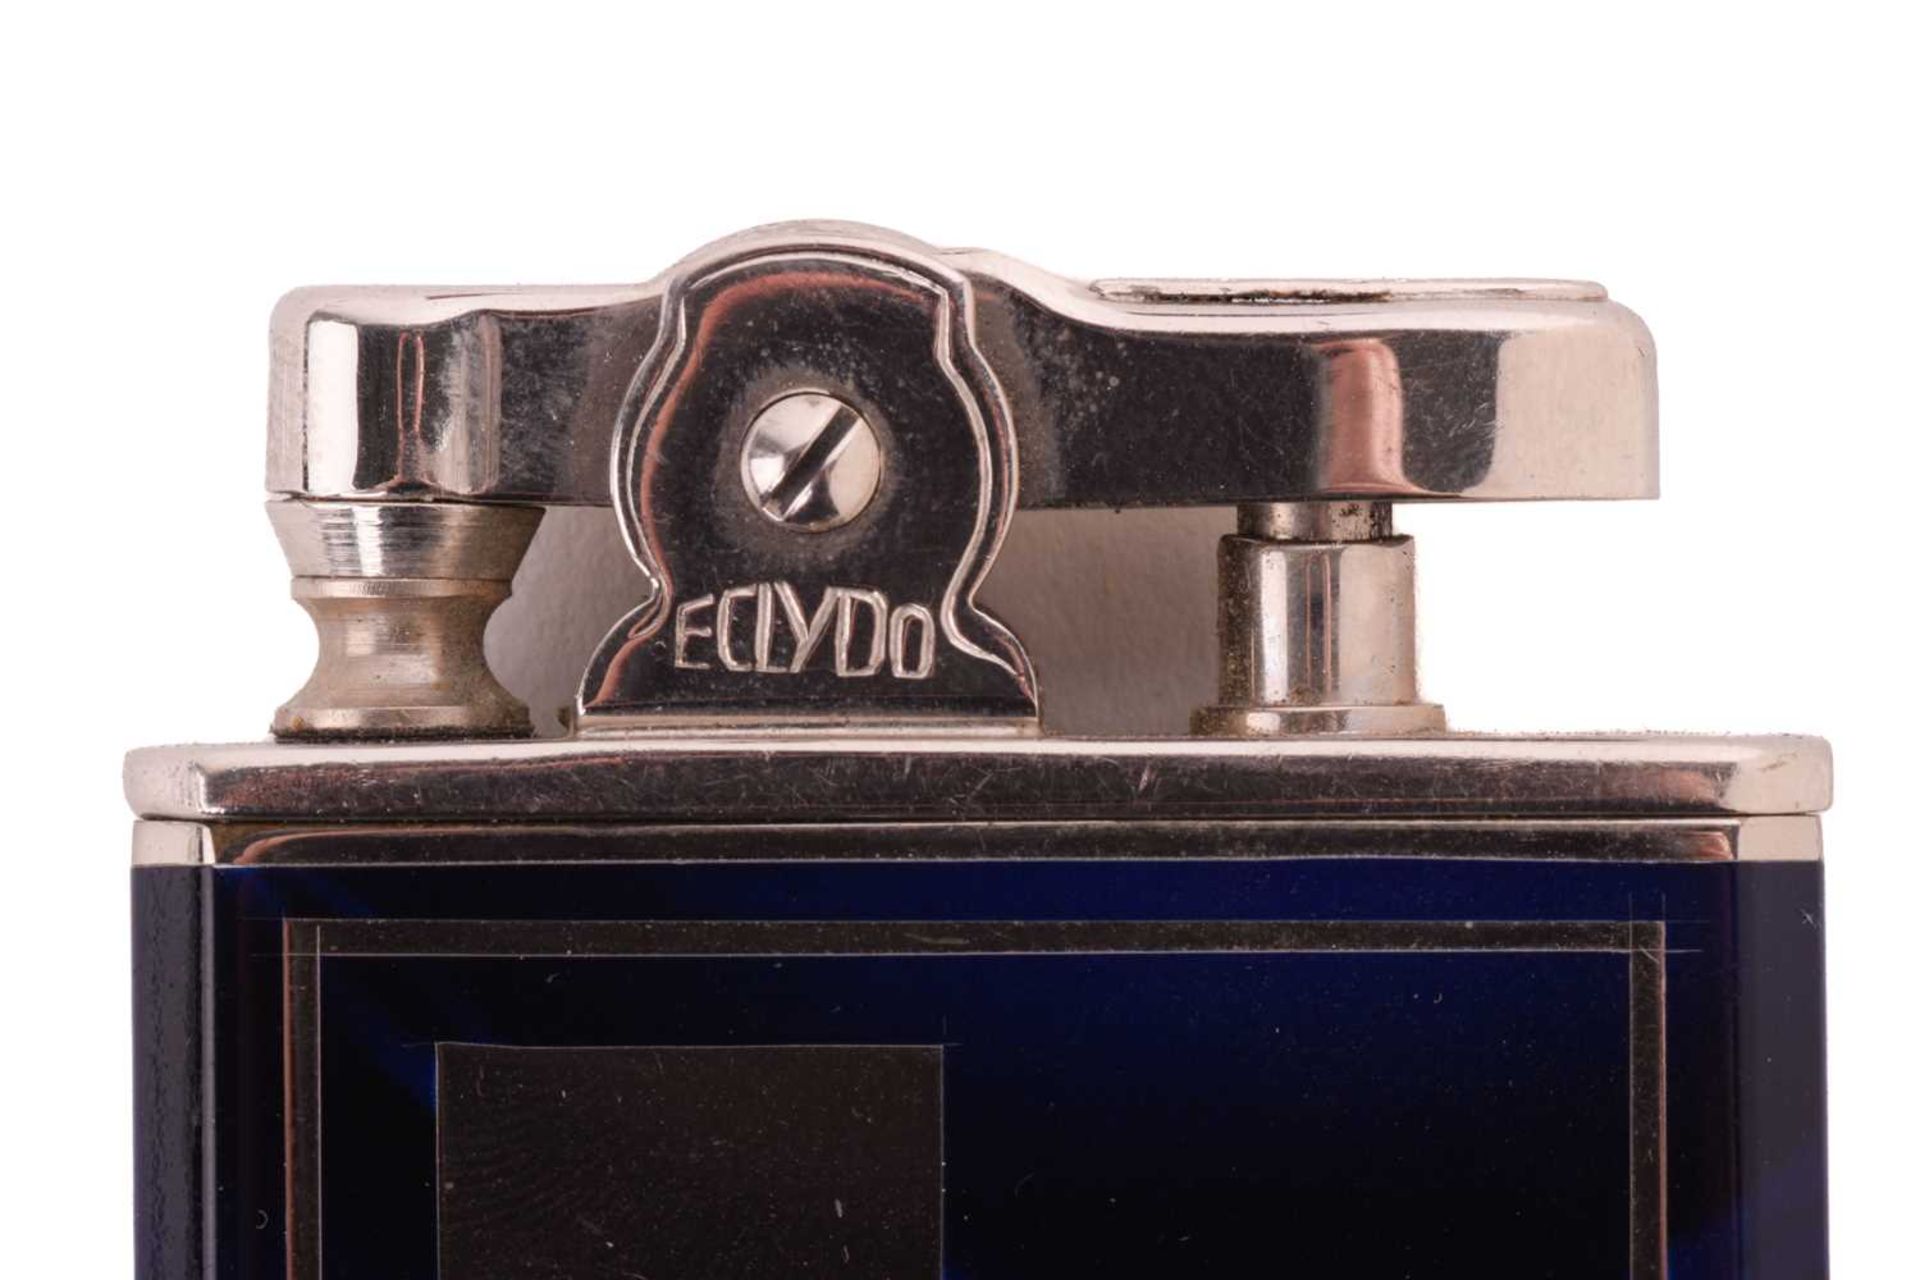 A Zenith 3600 automatic wristwatch, a Ronet Incabloc watch, Eclydo lighter/timepiece. The Zenith - Image 9 of 14